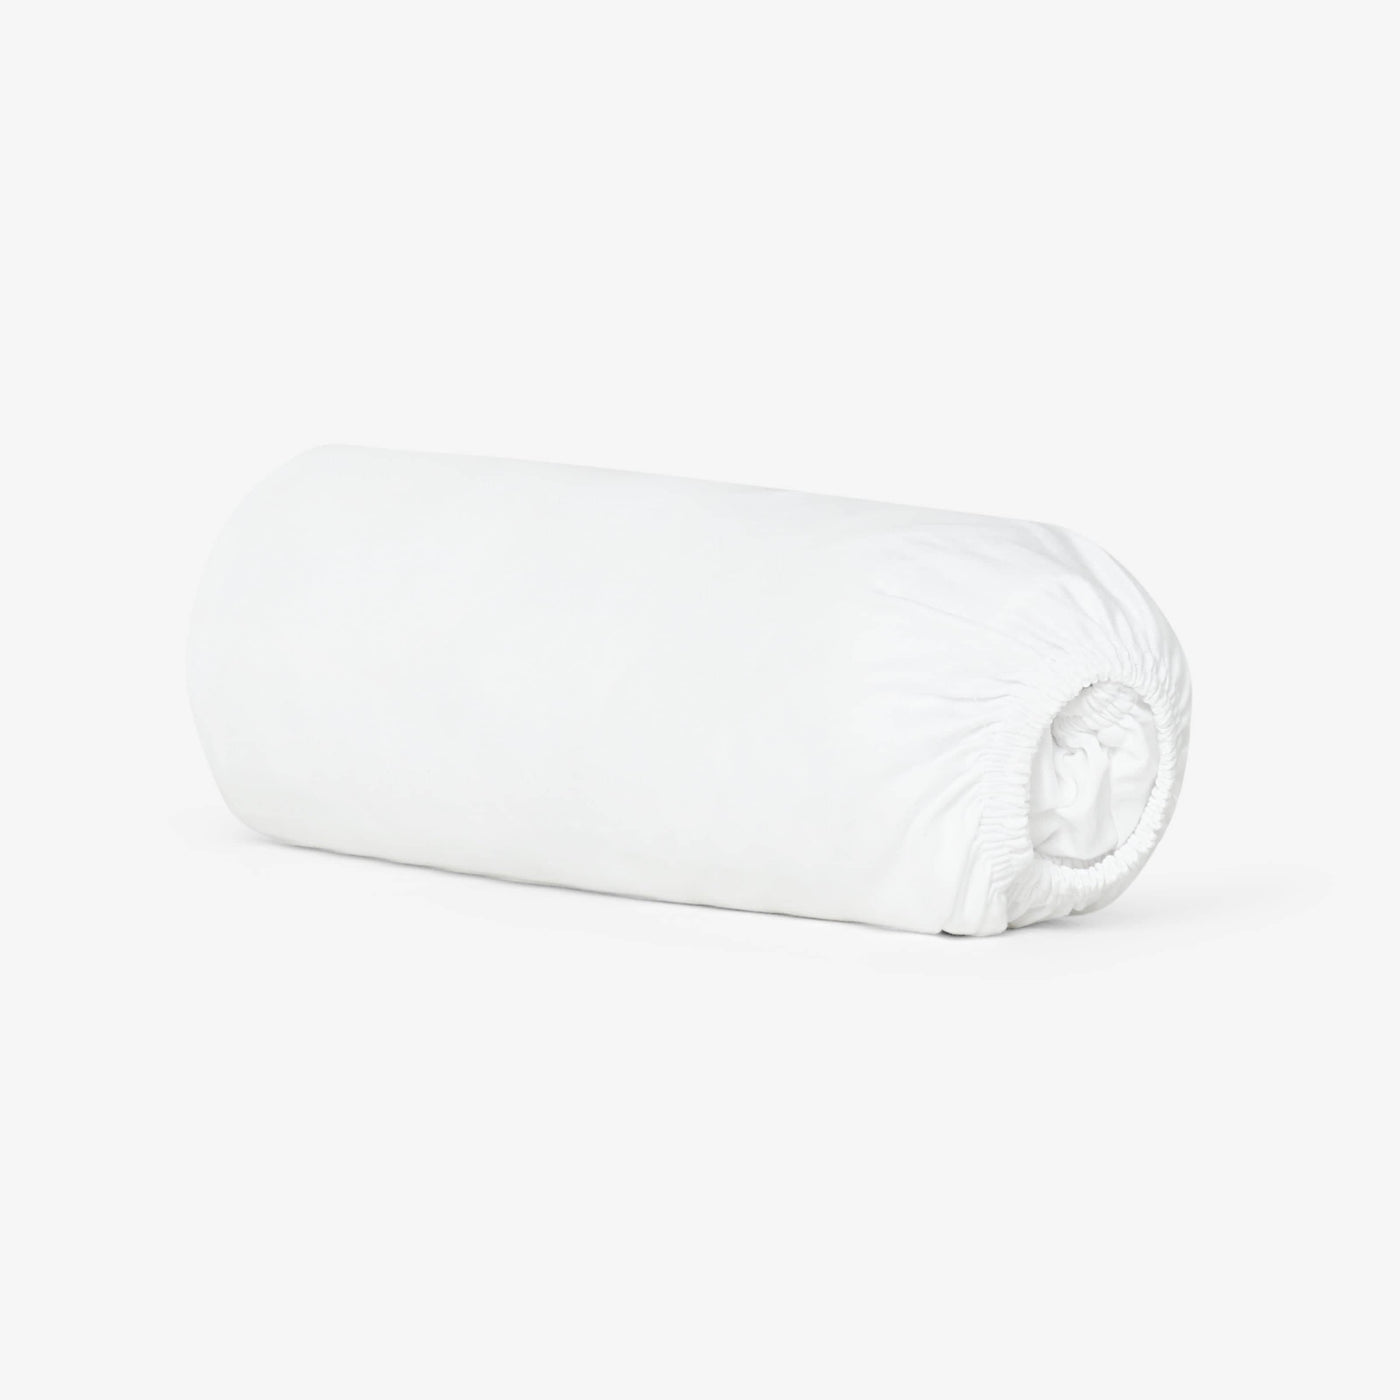 Darcy 100% Turkish Cotton 210 TC Fitted Sheet, White, Super King Size 3